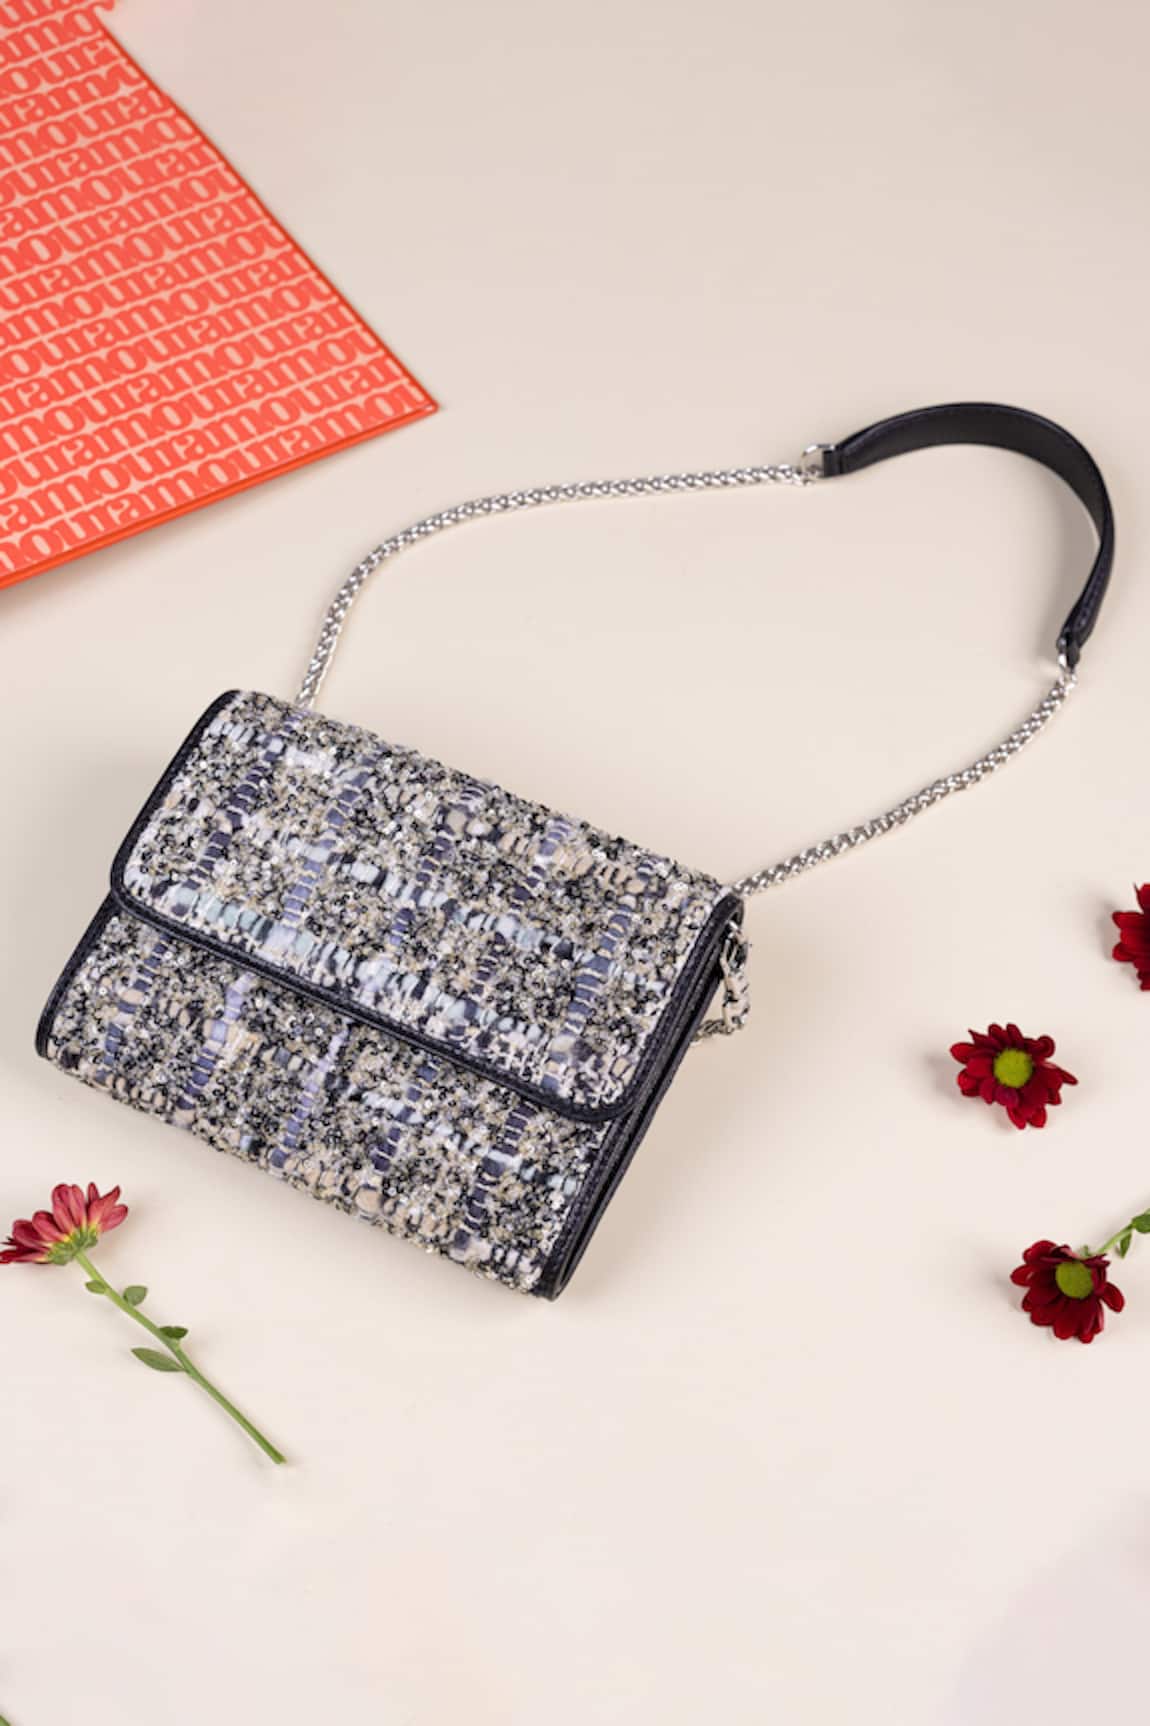 The Leather Garden Plumeria Leather Embellished Bag